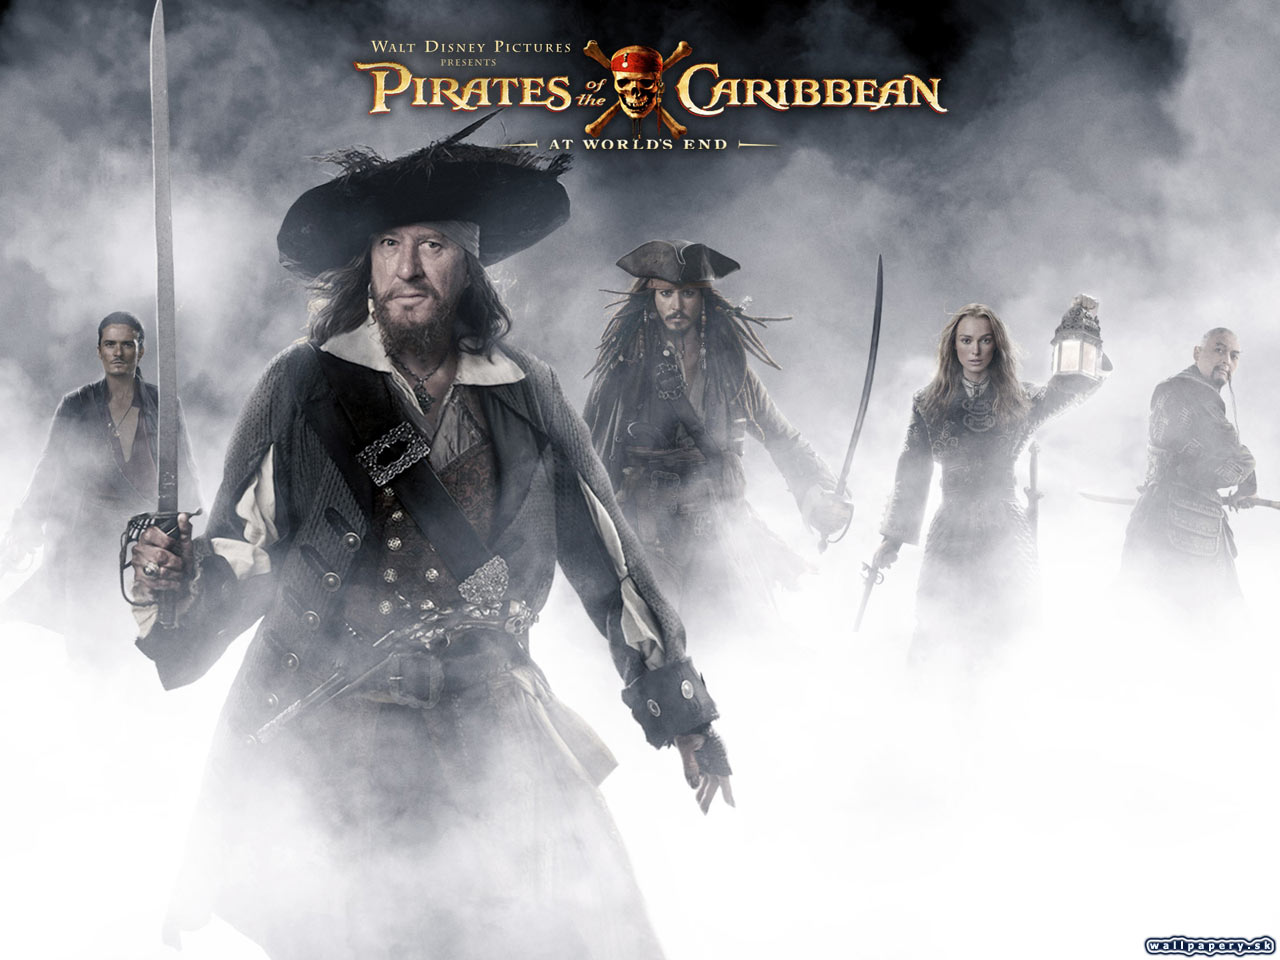 Pirates of the Caribbean: At World's End - wallpaper 4